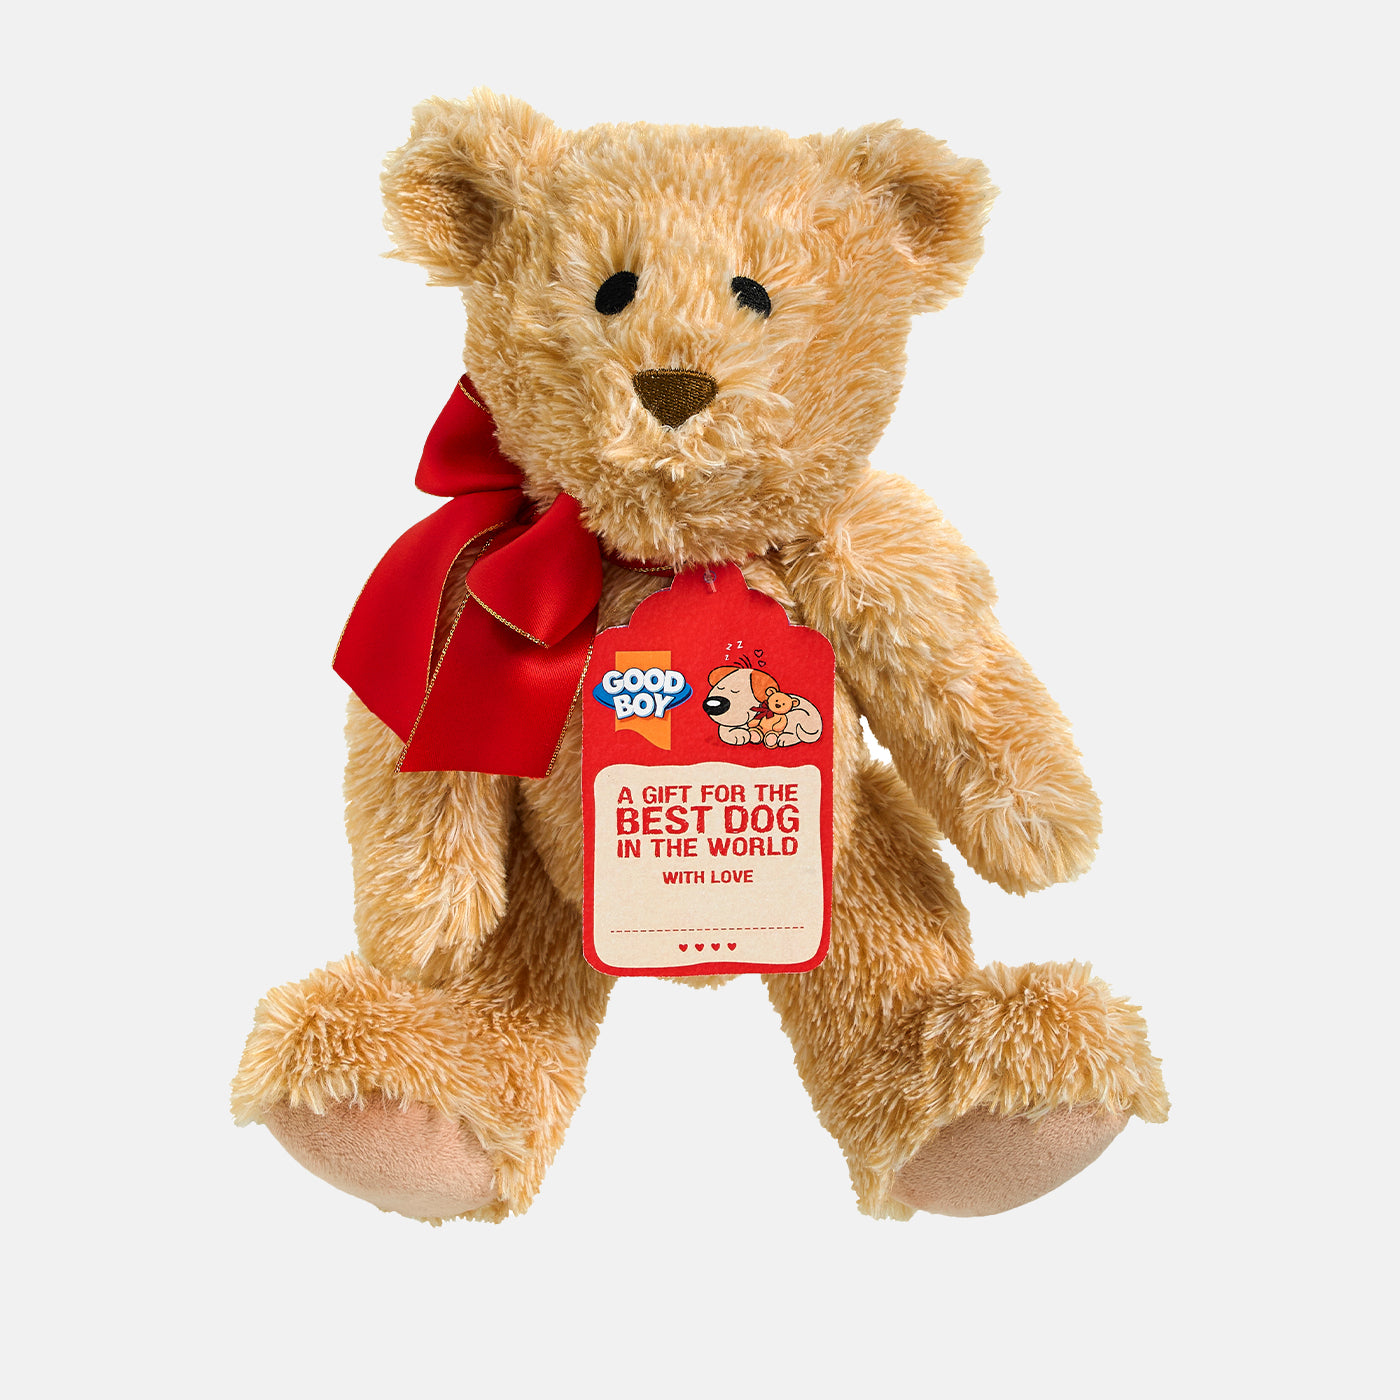 Good Boy Cuddly Gift Bear For Dogs, The Perfect Pet Dog Toy For Christmas, Available Now at Lords & Labradors